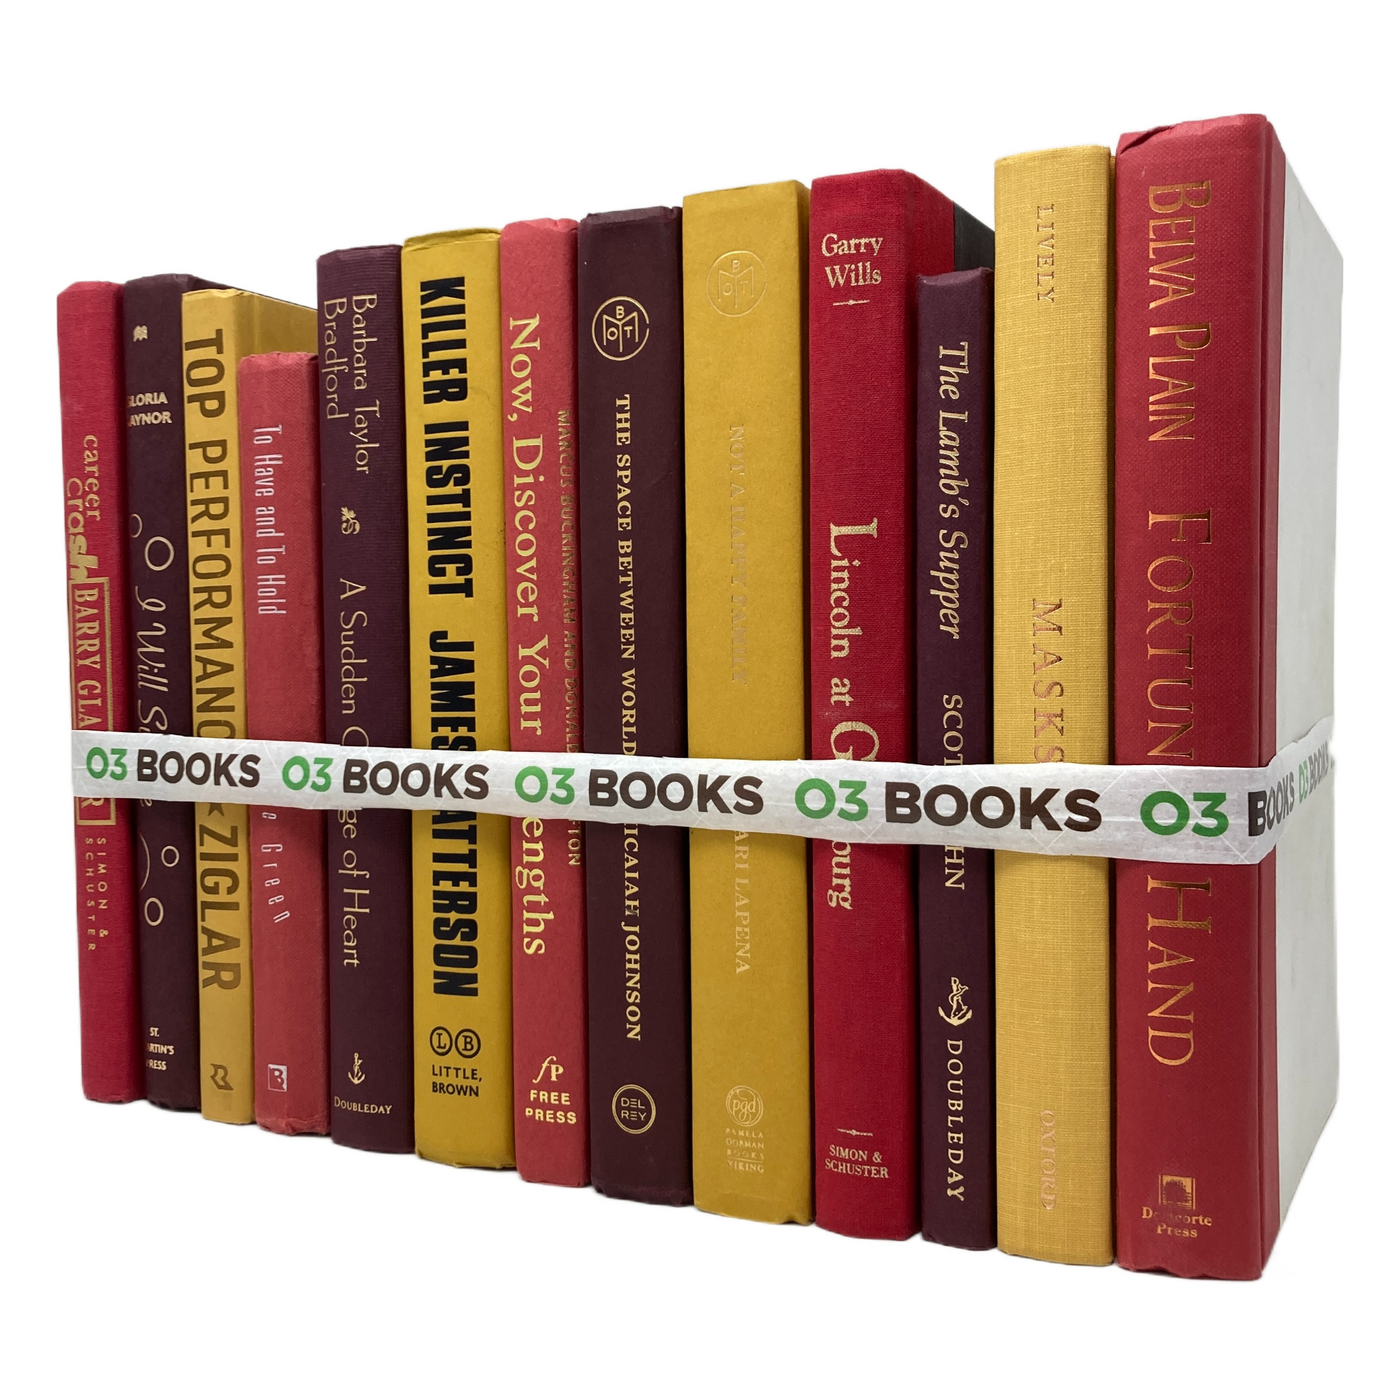 Golden Harvest Decorative Books Red Burgundy and Yellow